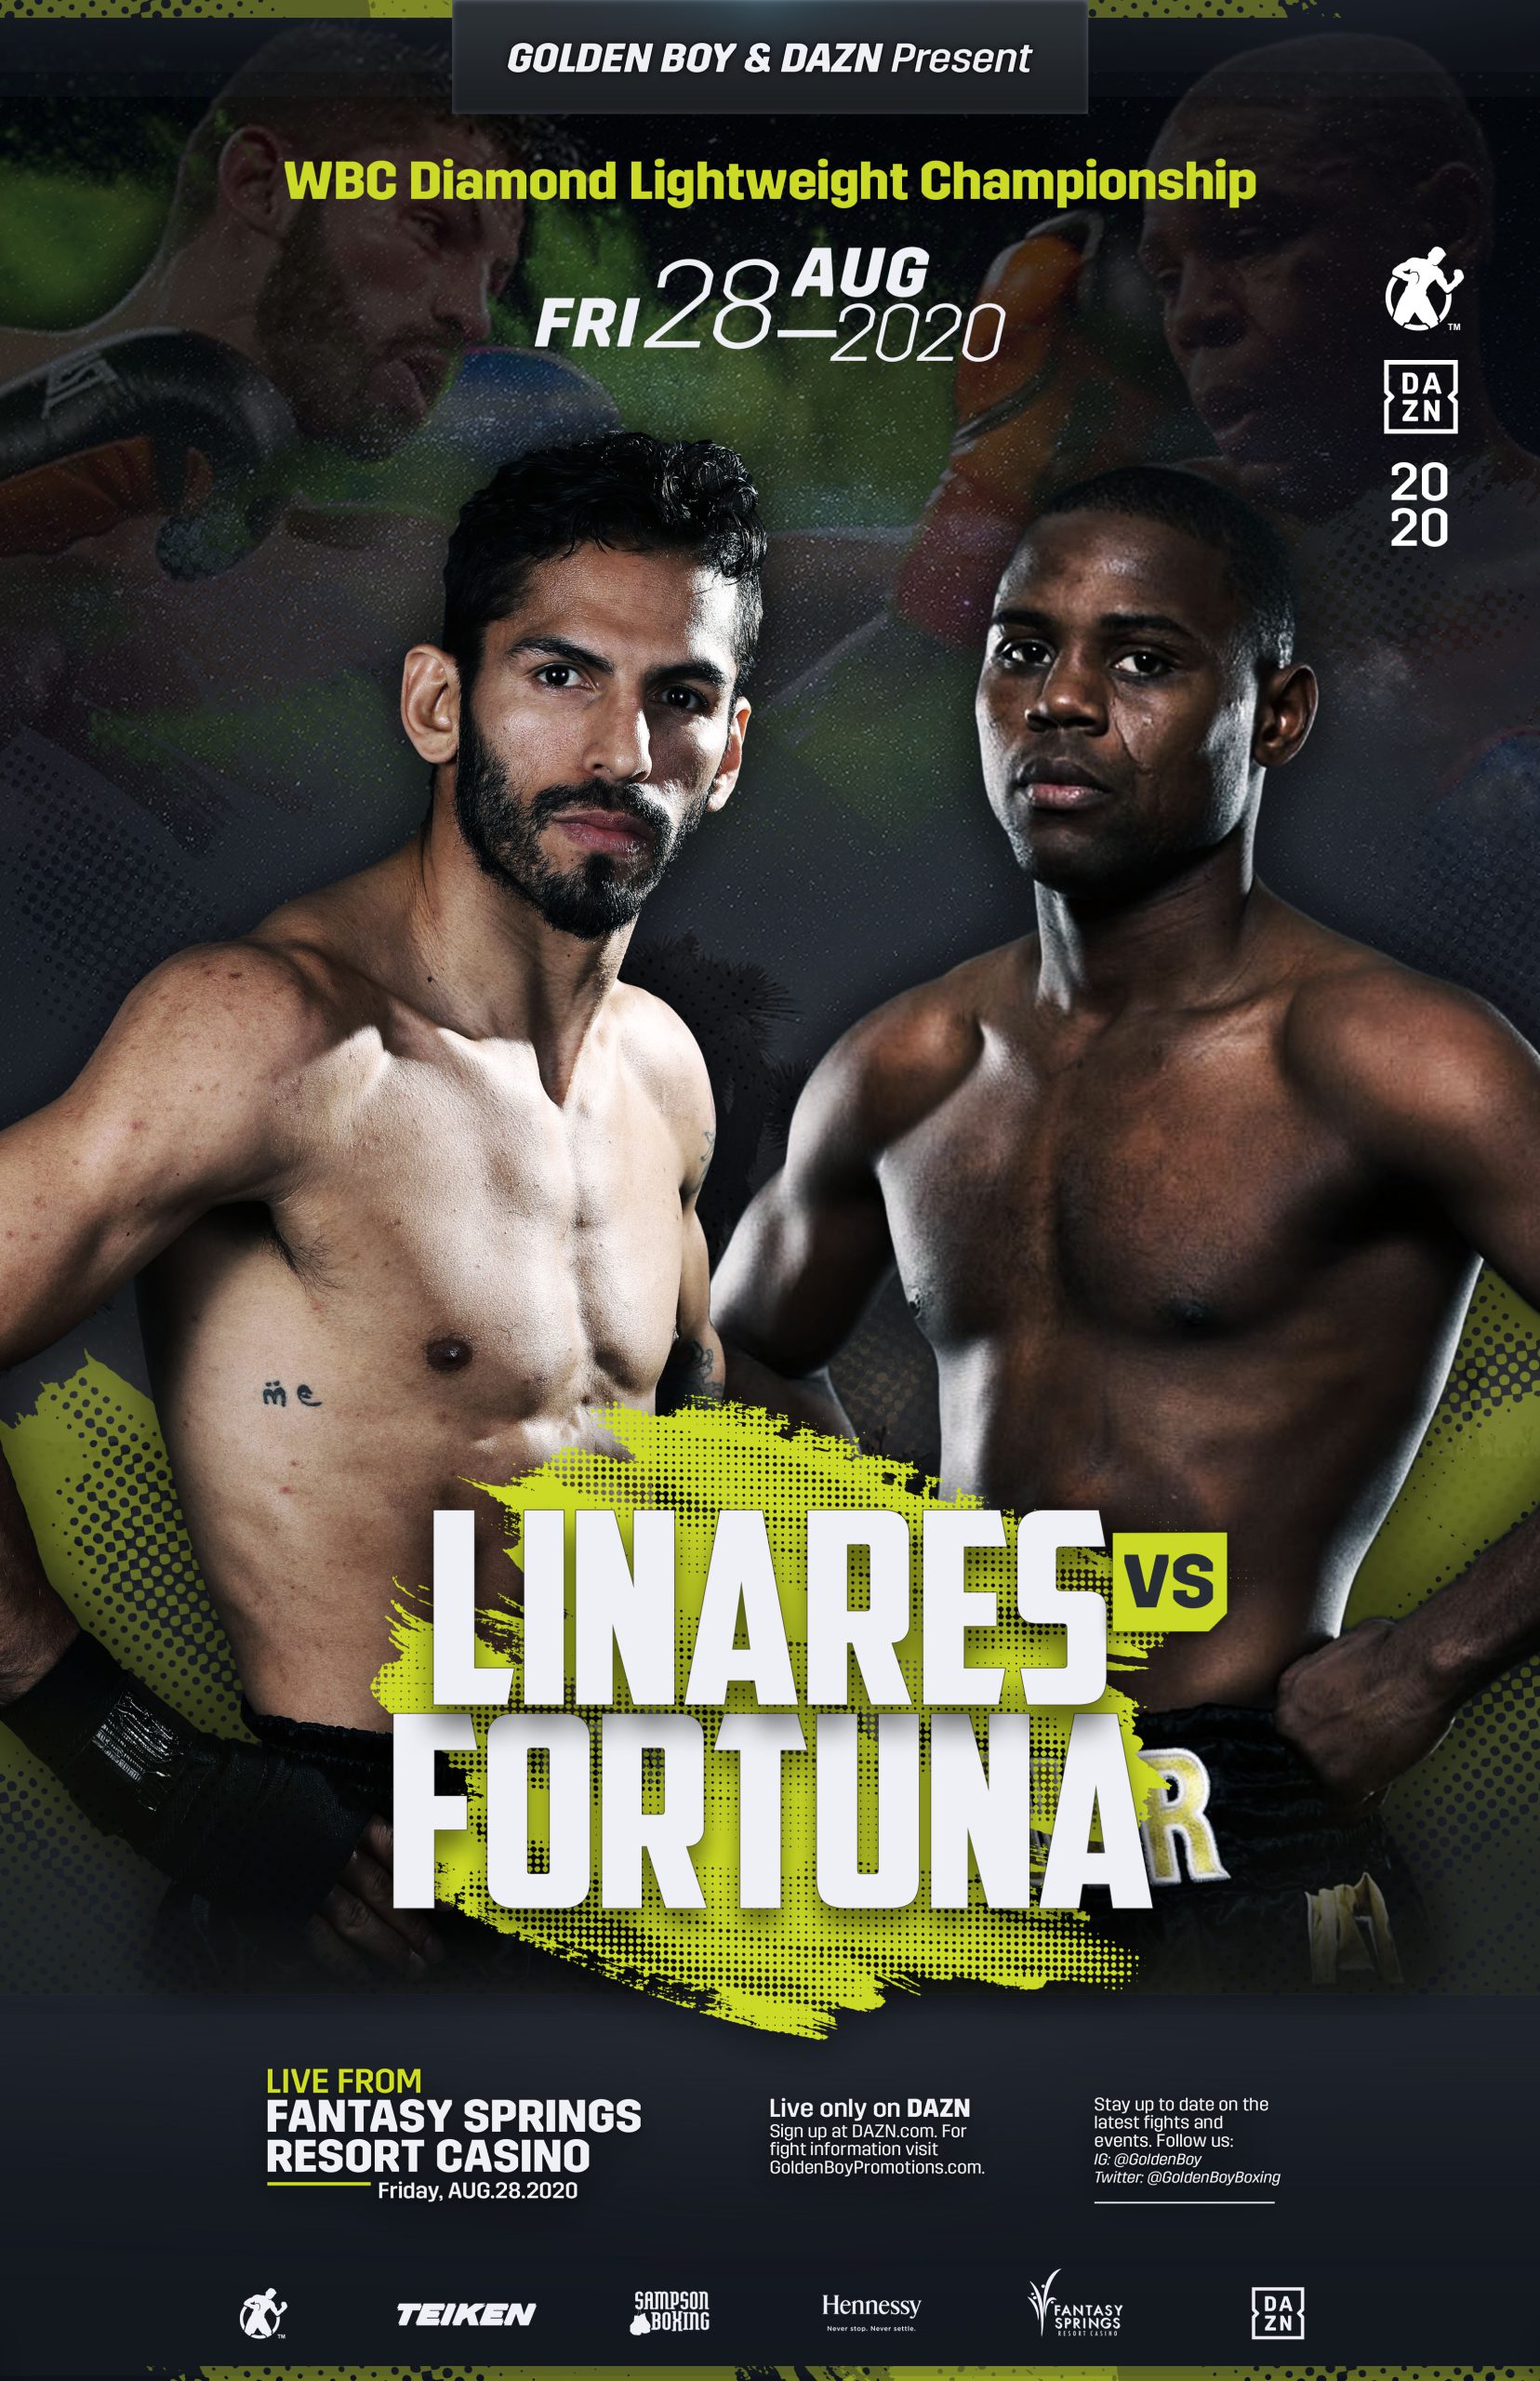 JORGE EL NIÑO DE ORO LINARES TO FACE JAVIER EL ABEJON FORTUNA FOR THE WBC DIAMOND LIGHTWEIGHT CHAMPIONSHIP FRIDAY, AUGUST 28 AT FANTASY SPRINGS RESORT CASINO AND STREAMED LIVE ON DAZN -